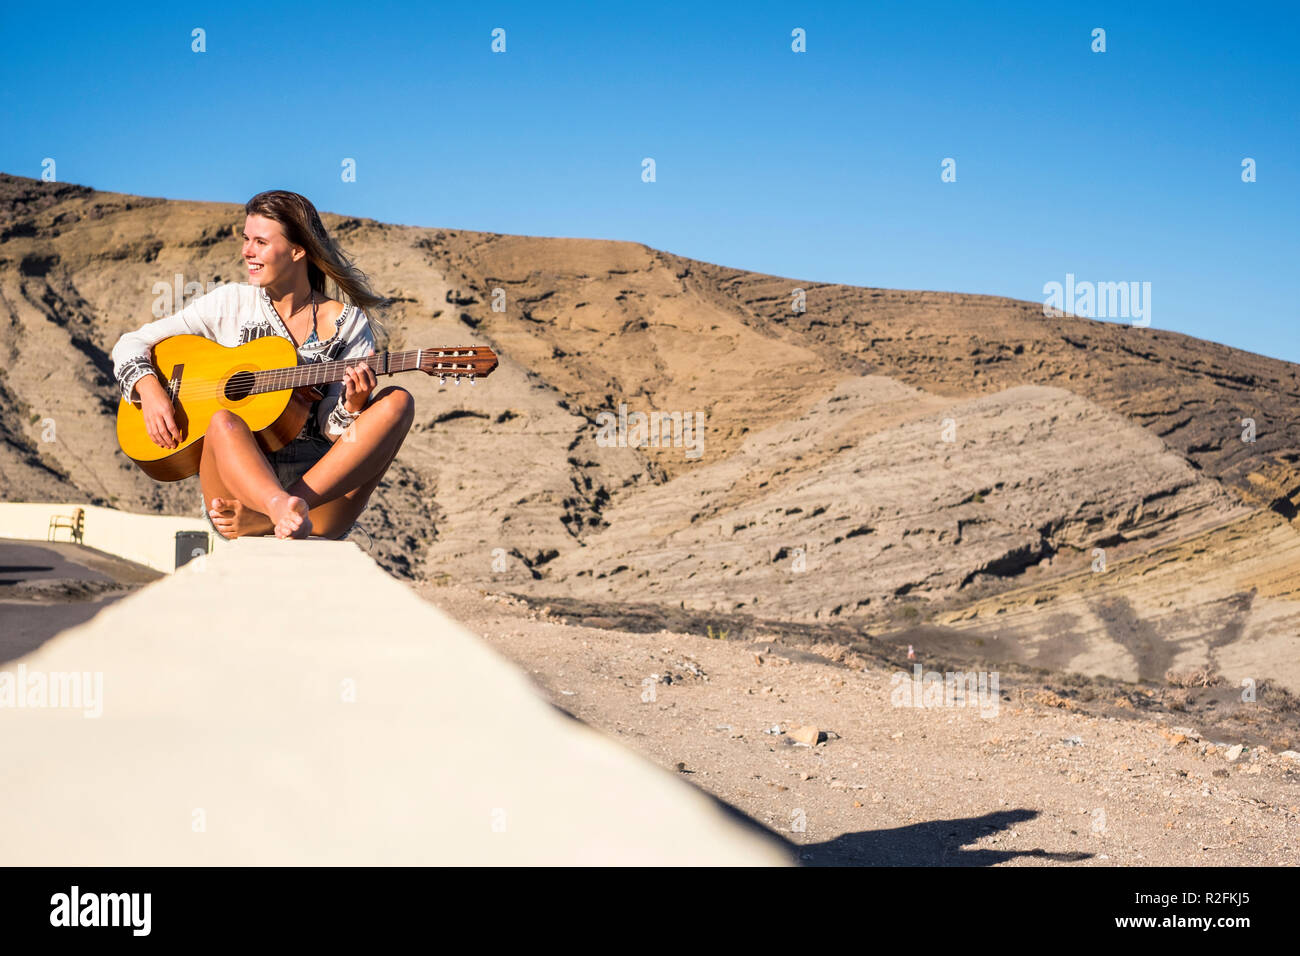 nippy and alternative lifestyle concept for blonde caucasian model smiling outdoor with mountains on the background and playing an old acoustic guitar. wind in her hair. Stock Photo